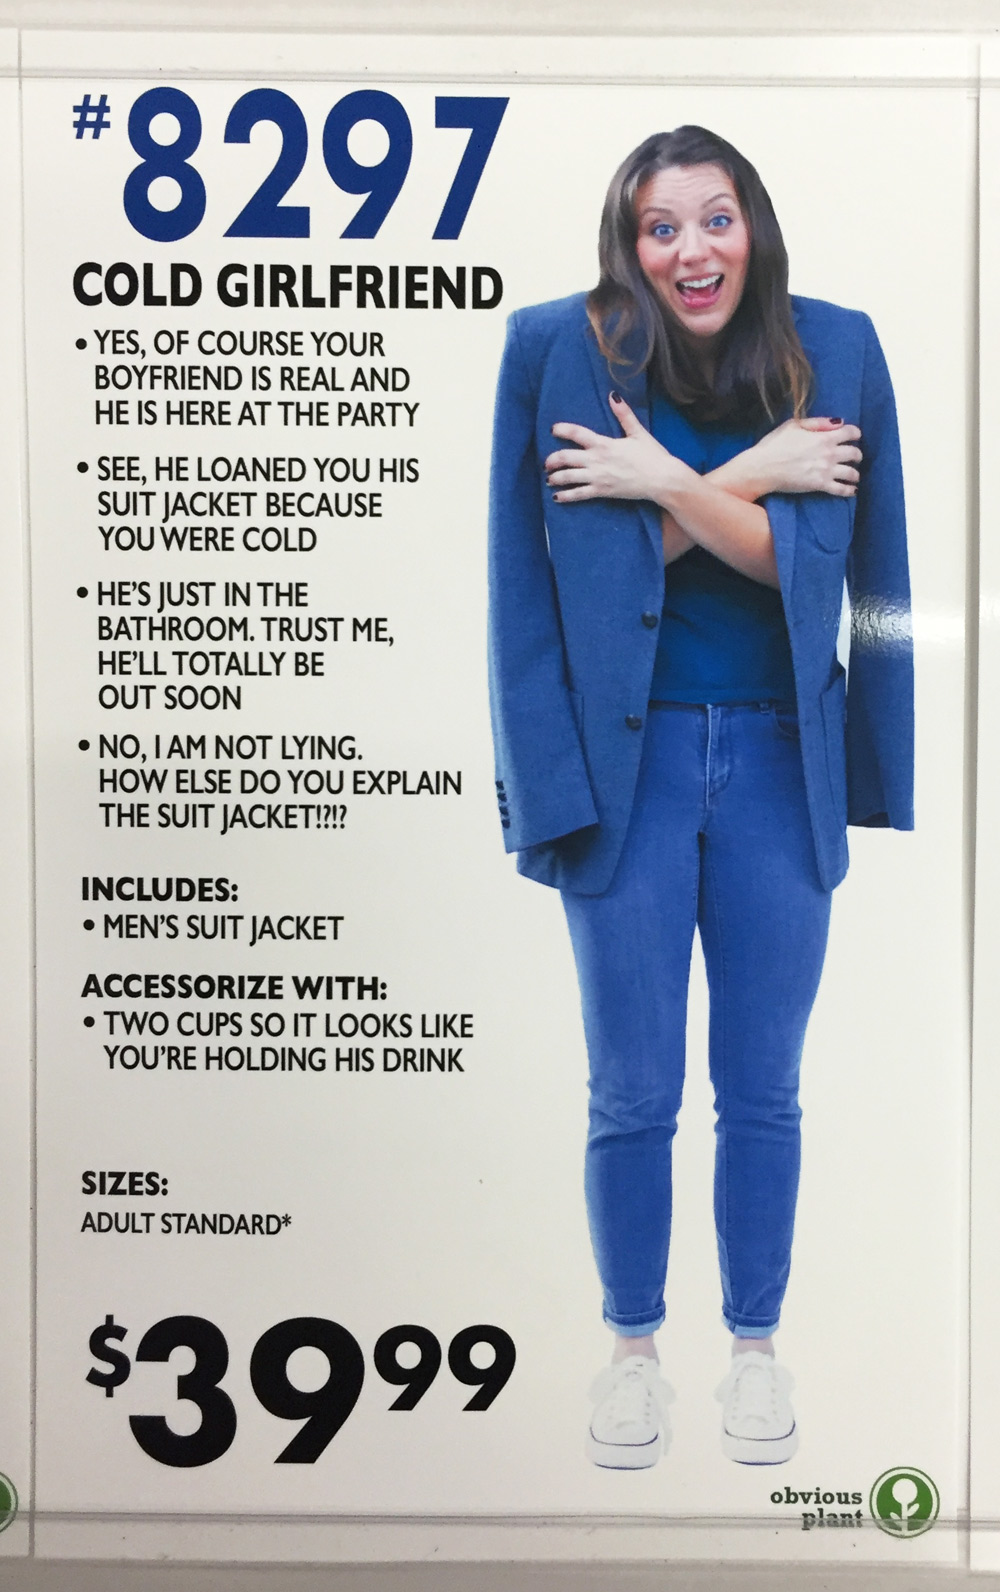 obvious plant costumes - 8297 Cold Girlfriend Yes. Of Course Your Boyfriend Is Real And He Is Here At The Party See, He Loaned You His Suit Jacket Because You Were Cold He'S Just In The Bathroom. Trust Me, He'Ll Totally Be Out Soon No, I Am Not Lying. How